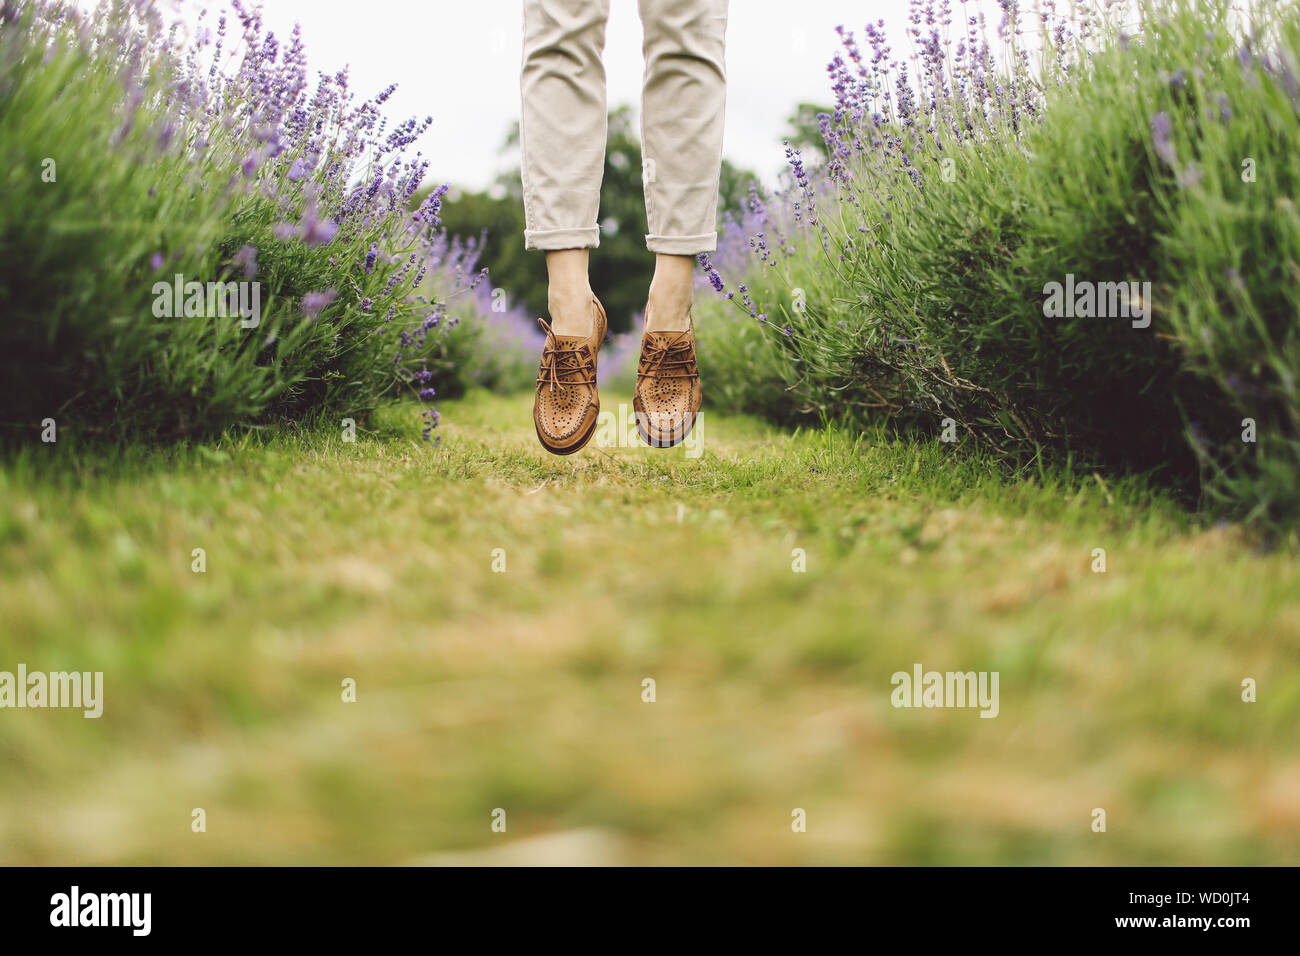 Low Section Of A Person Jumping Between Lavender Rows Stock Photo